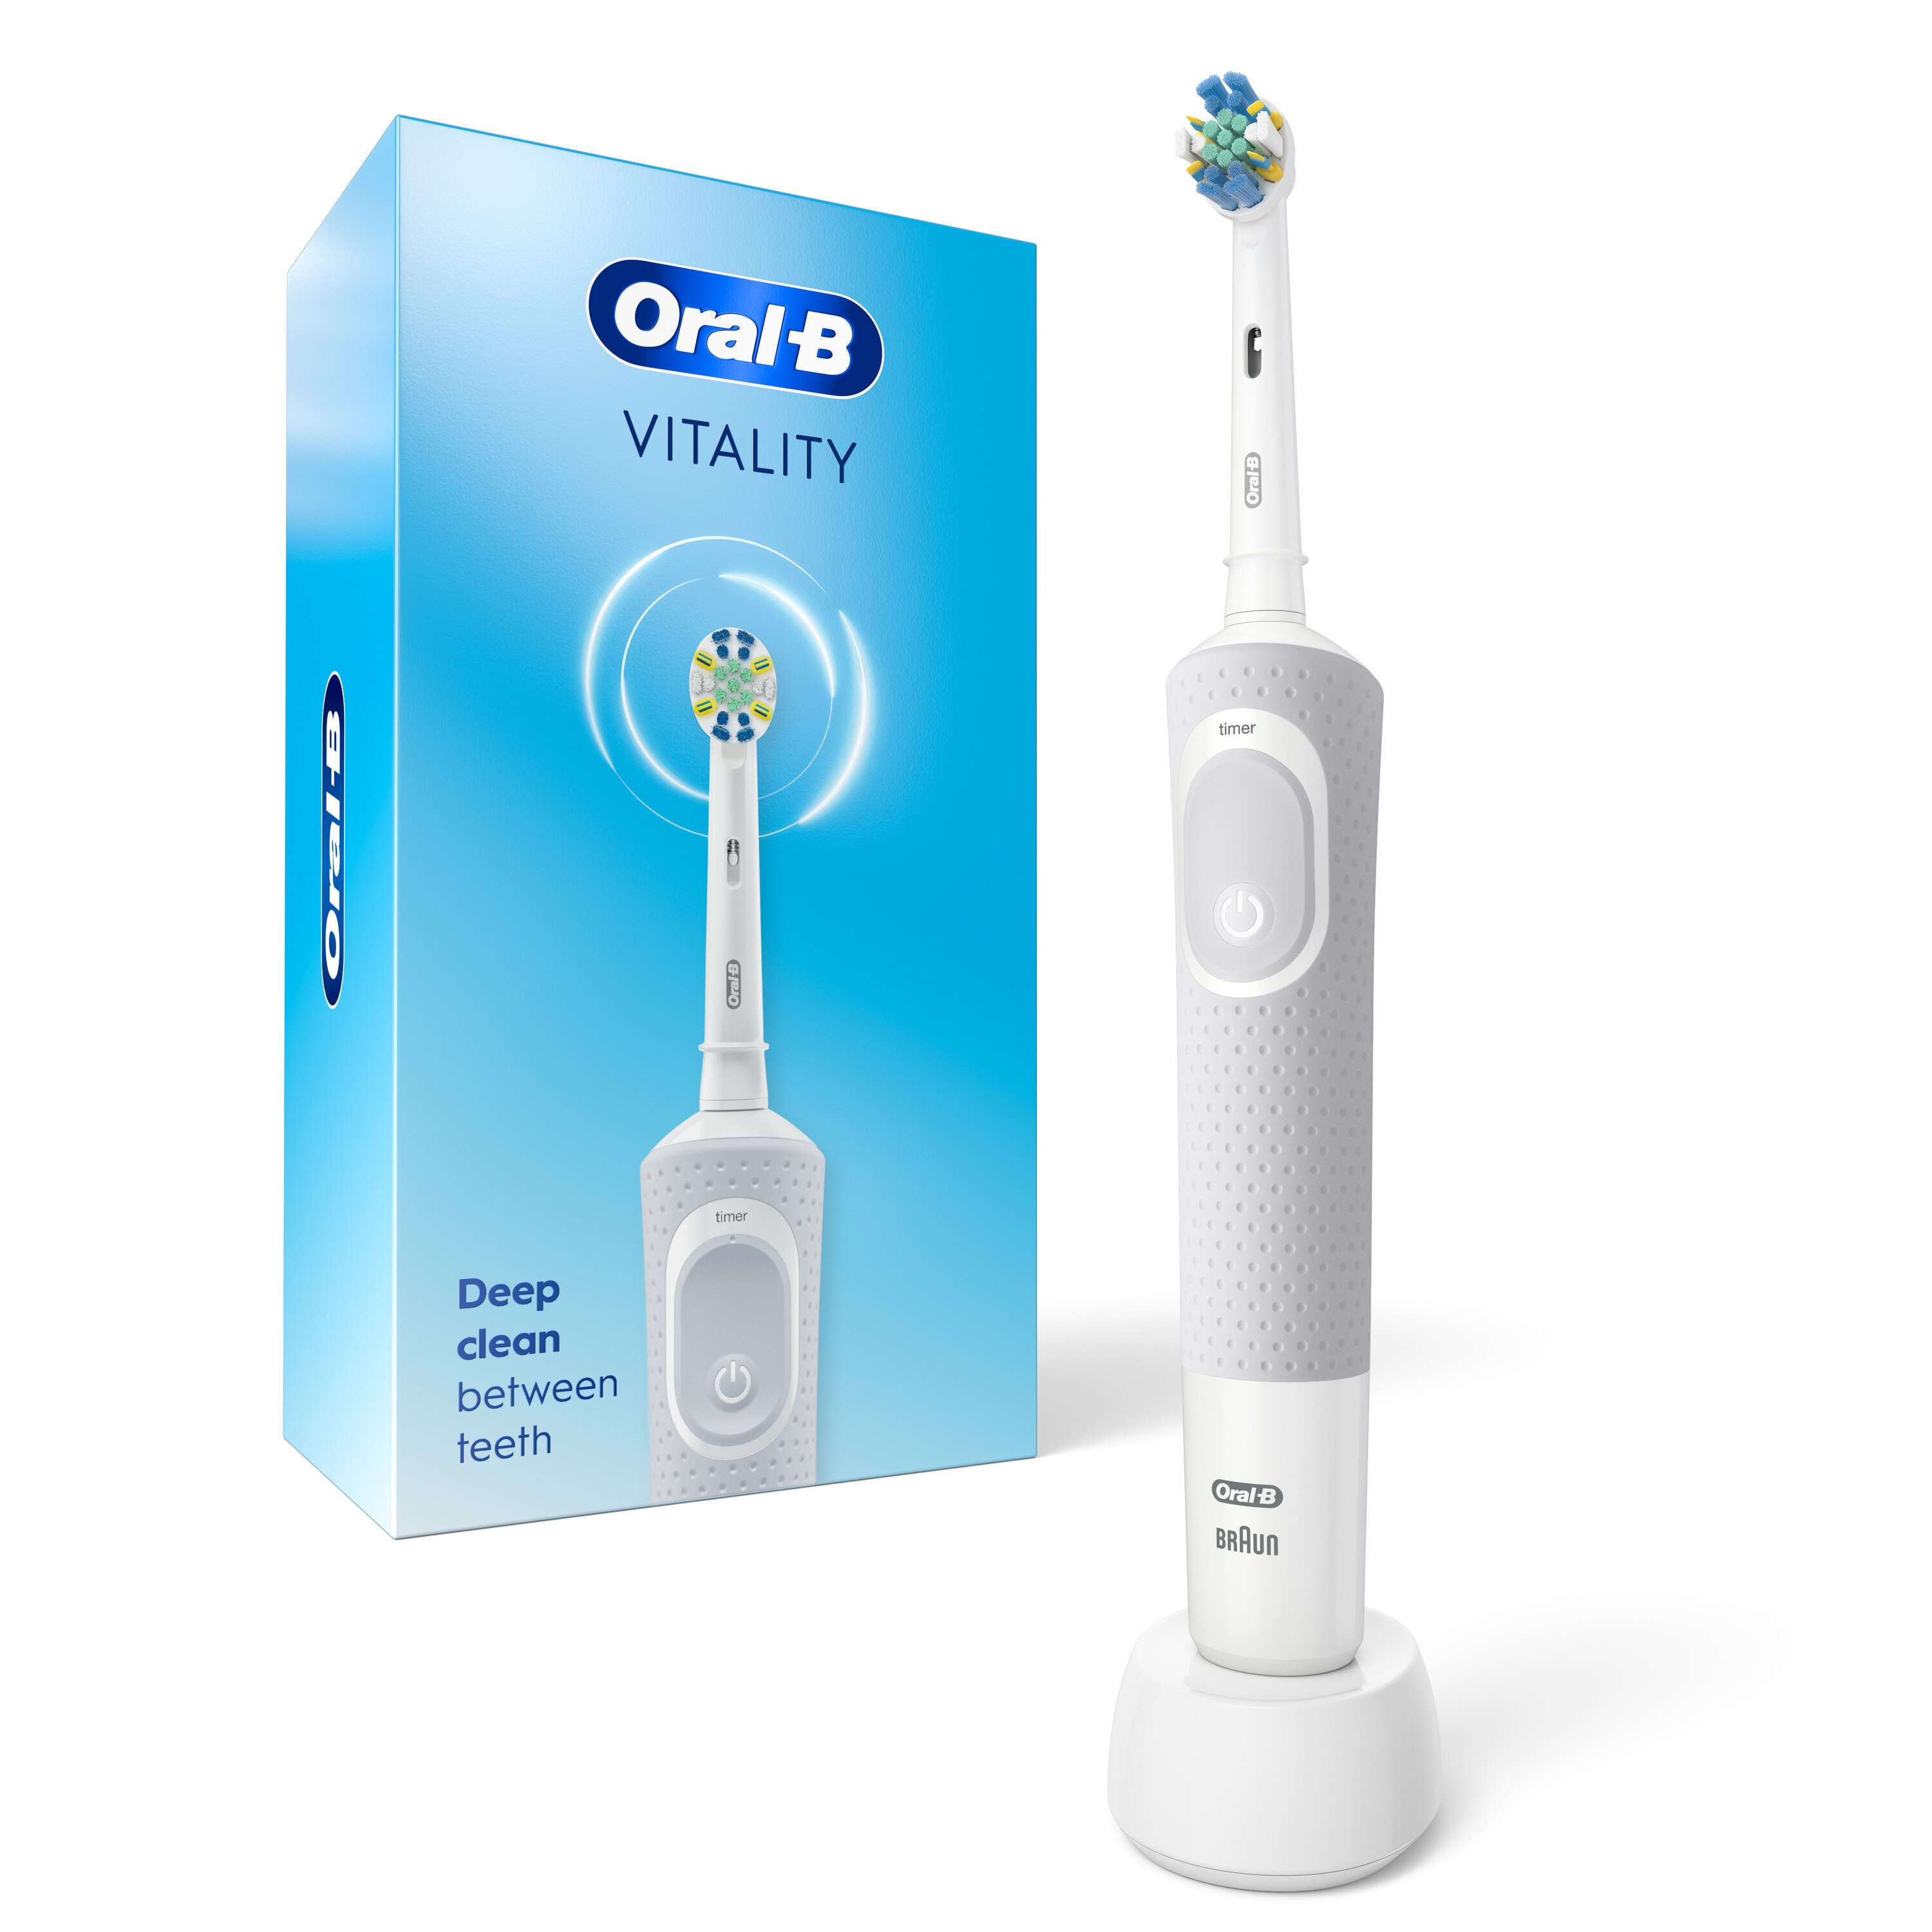 What Is The Best Electric Toothbrush?